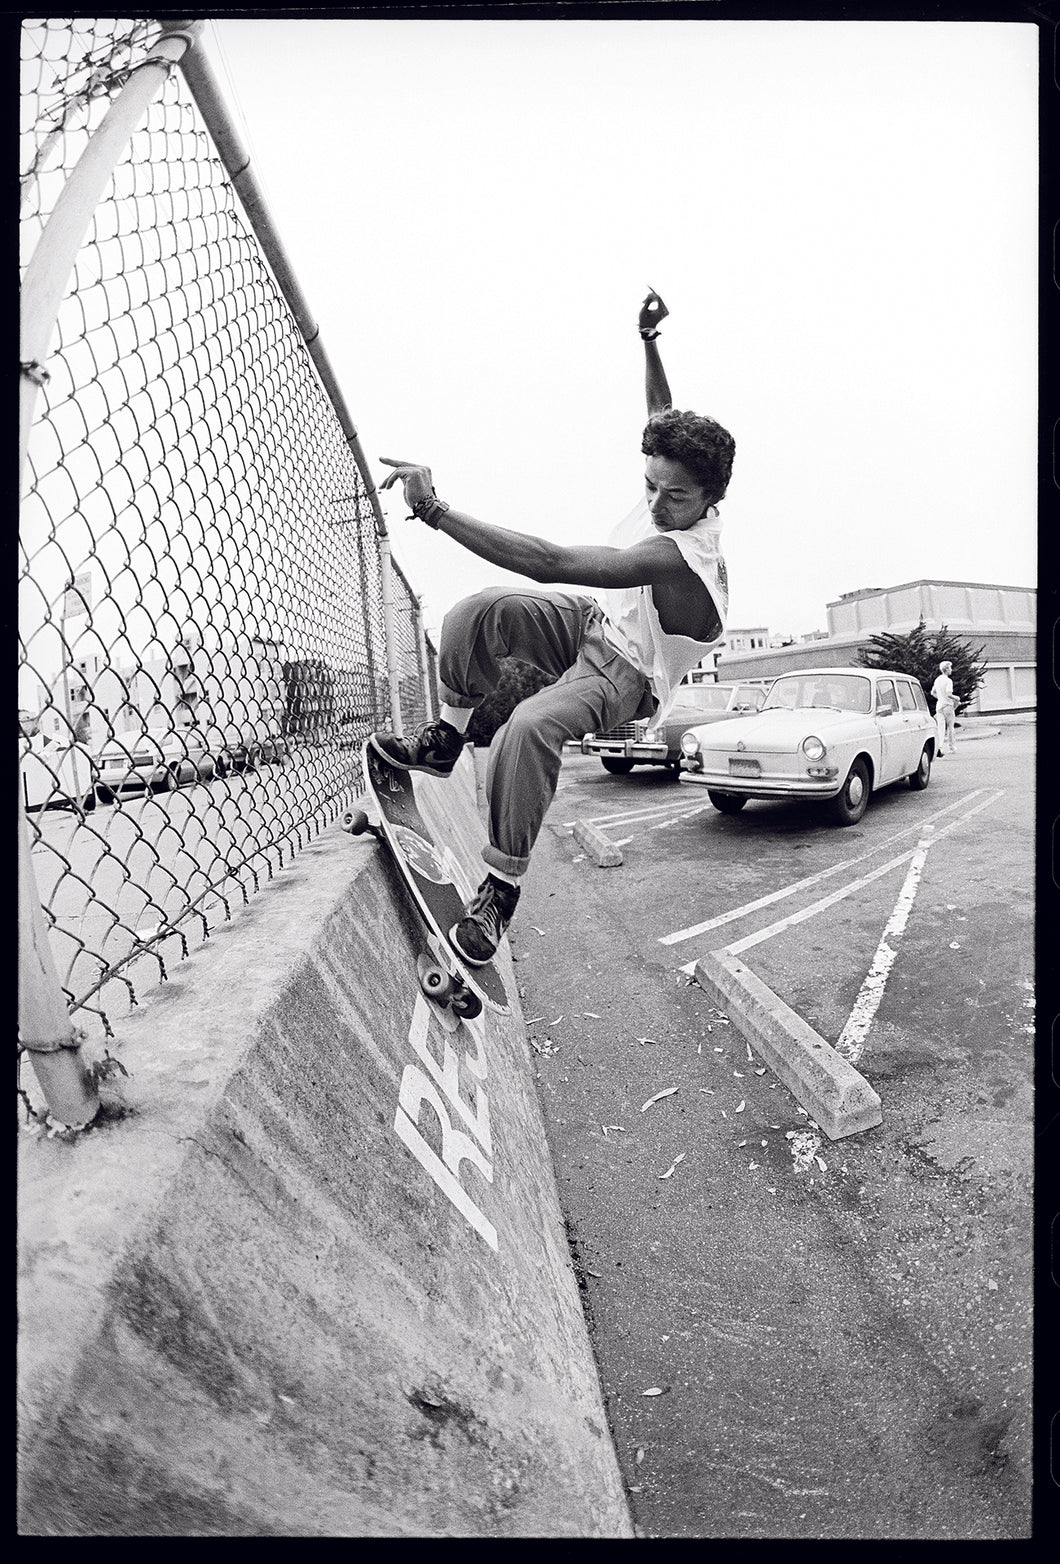 Tommy Guerrero Frontside Grind Whale wall San Francisco 1986